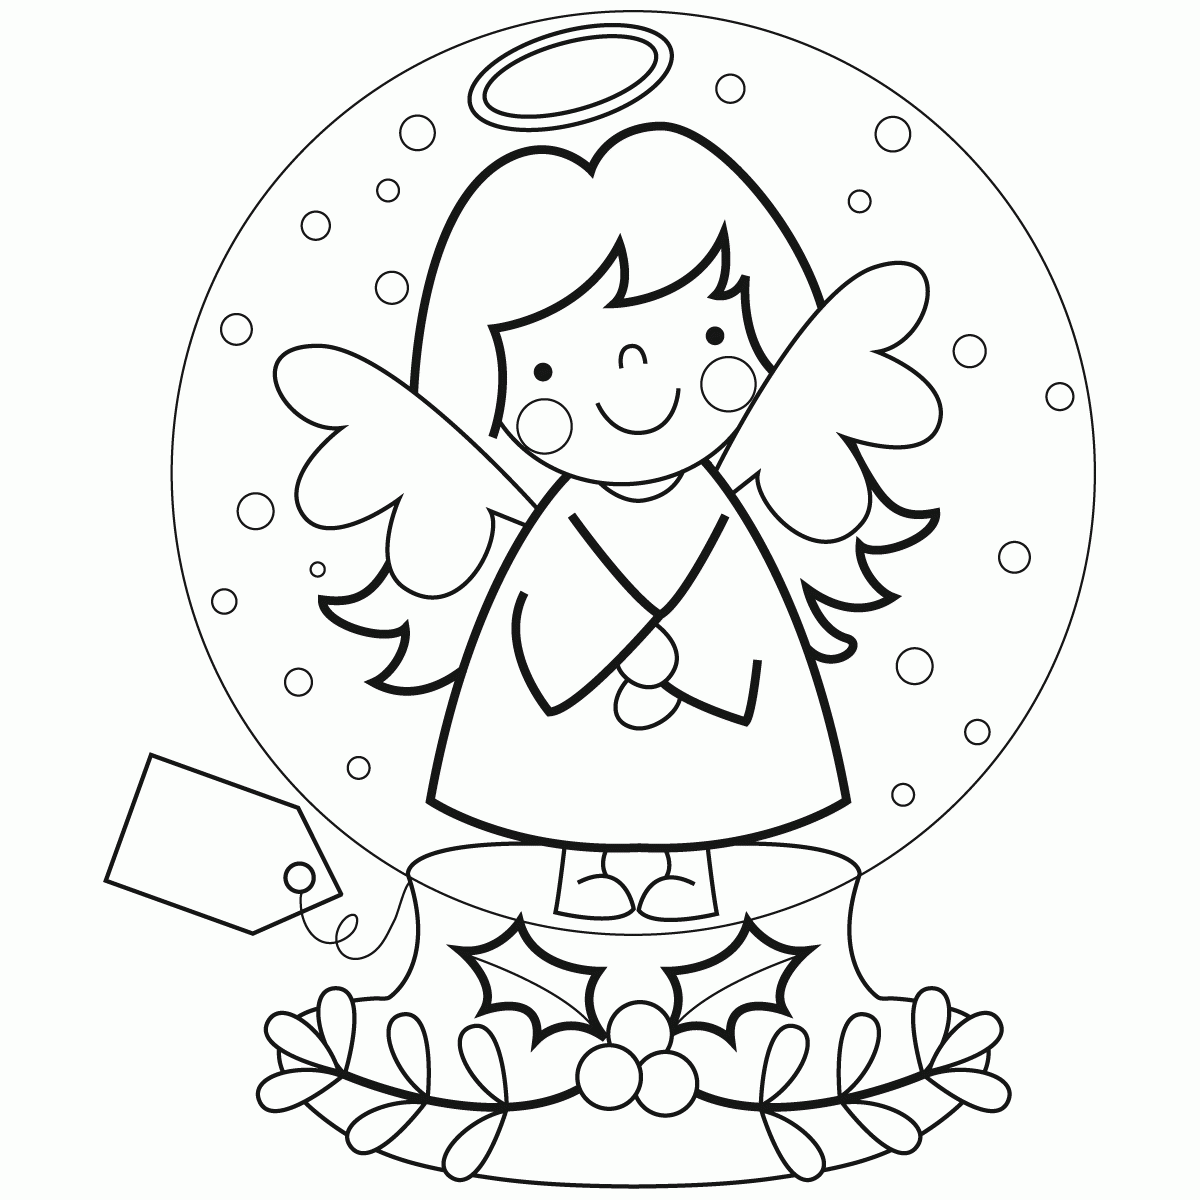 Christmas Globe Coloring Pages - Coloring Pages For All Ages